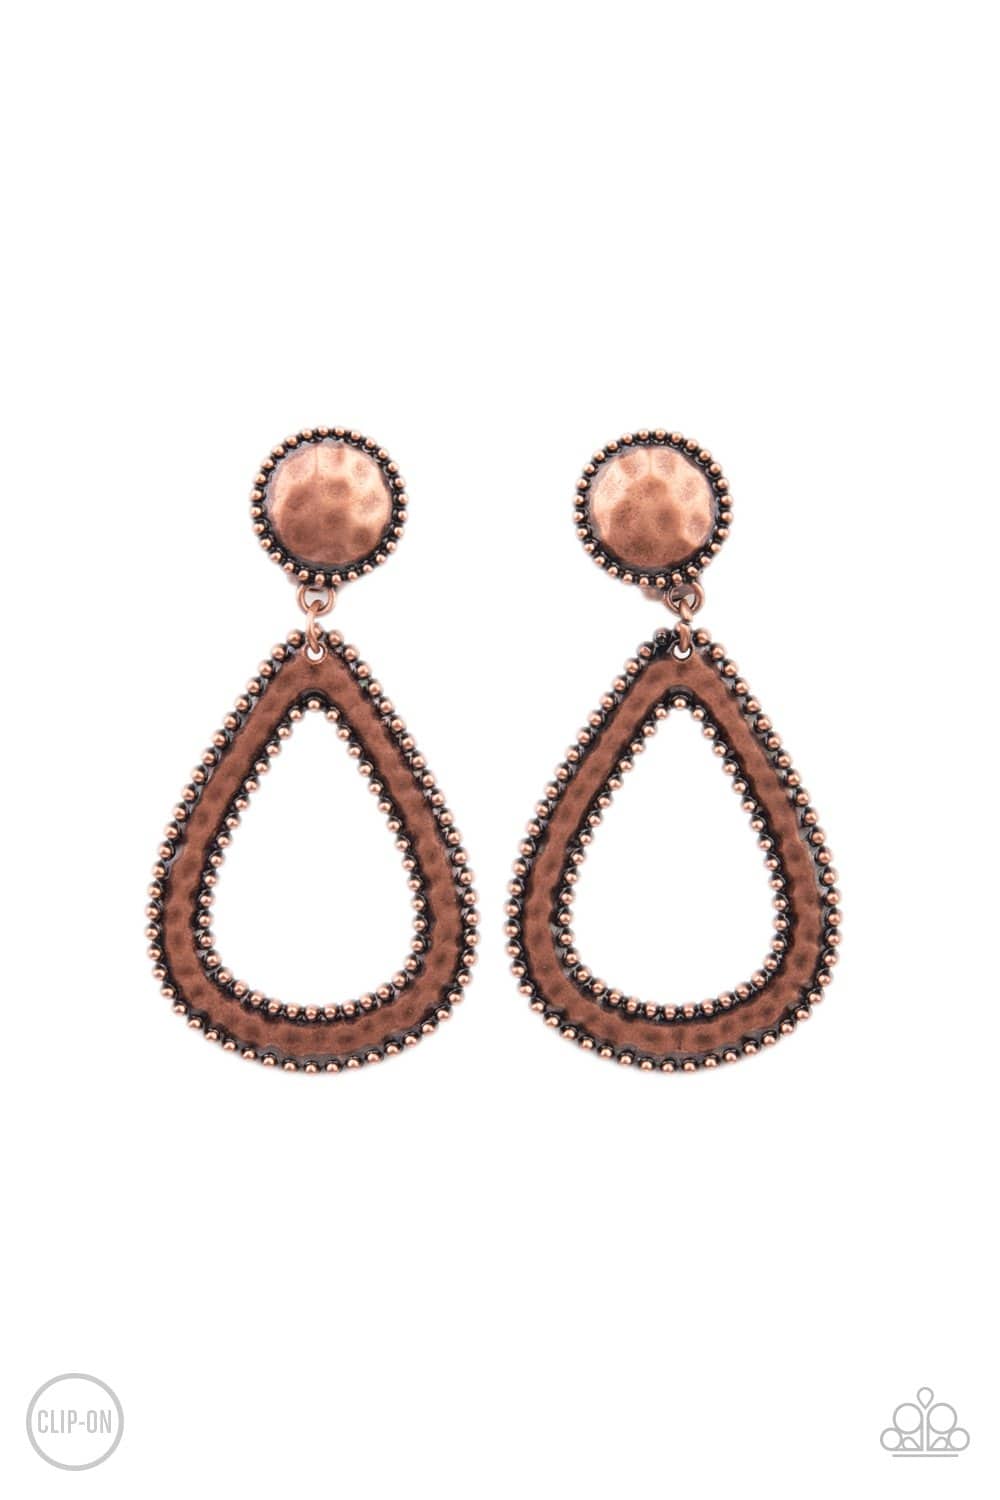 (Coming Soon) Beyond The Borders - Copper - Paparazzi Jewelry